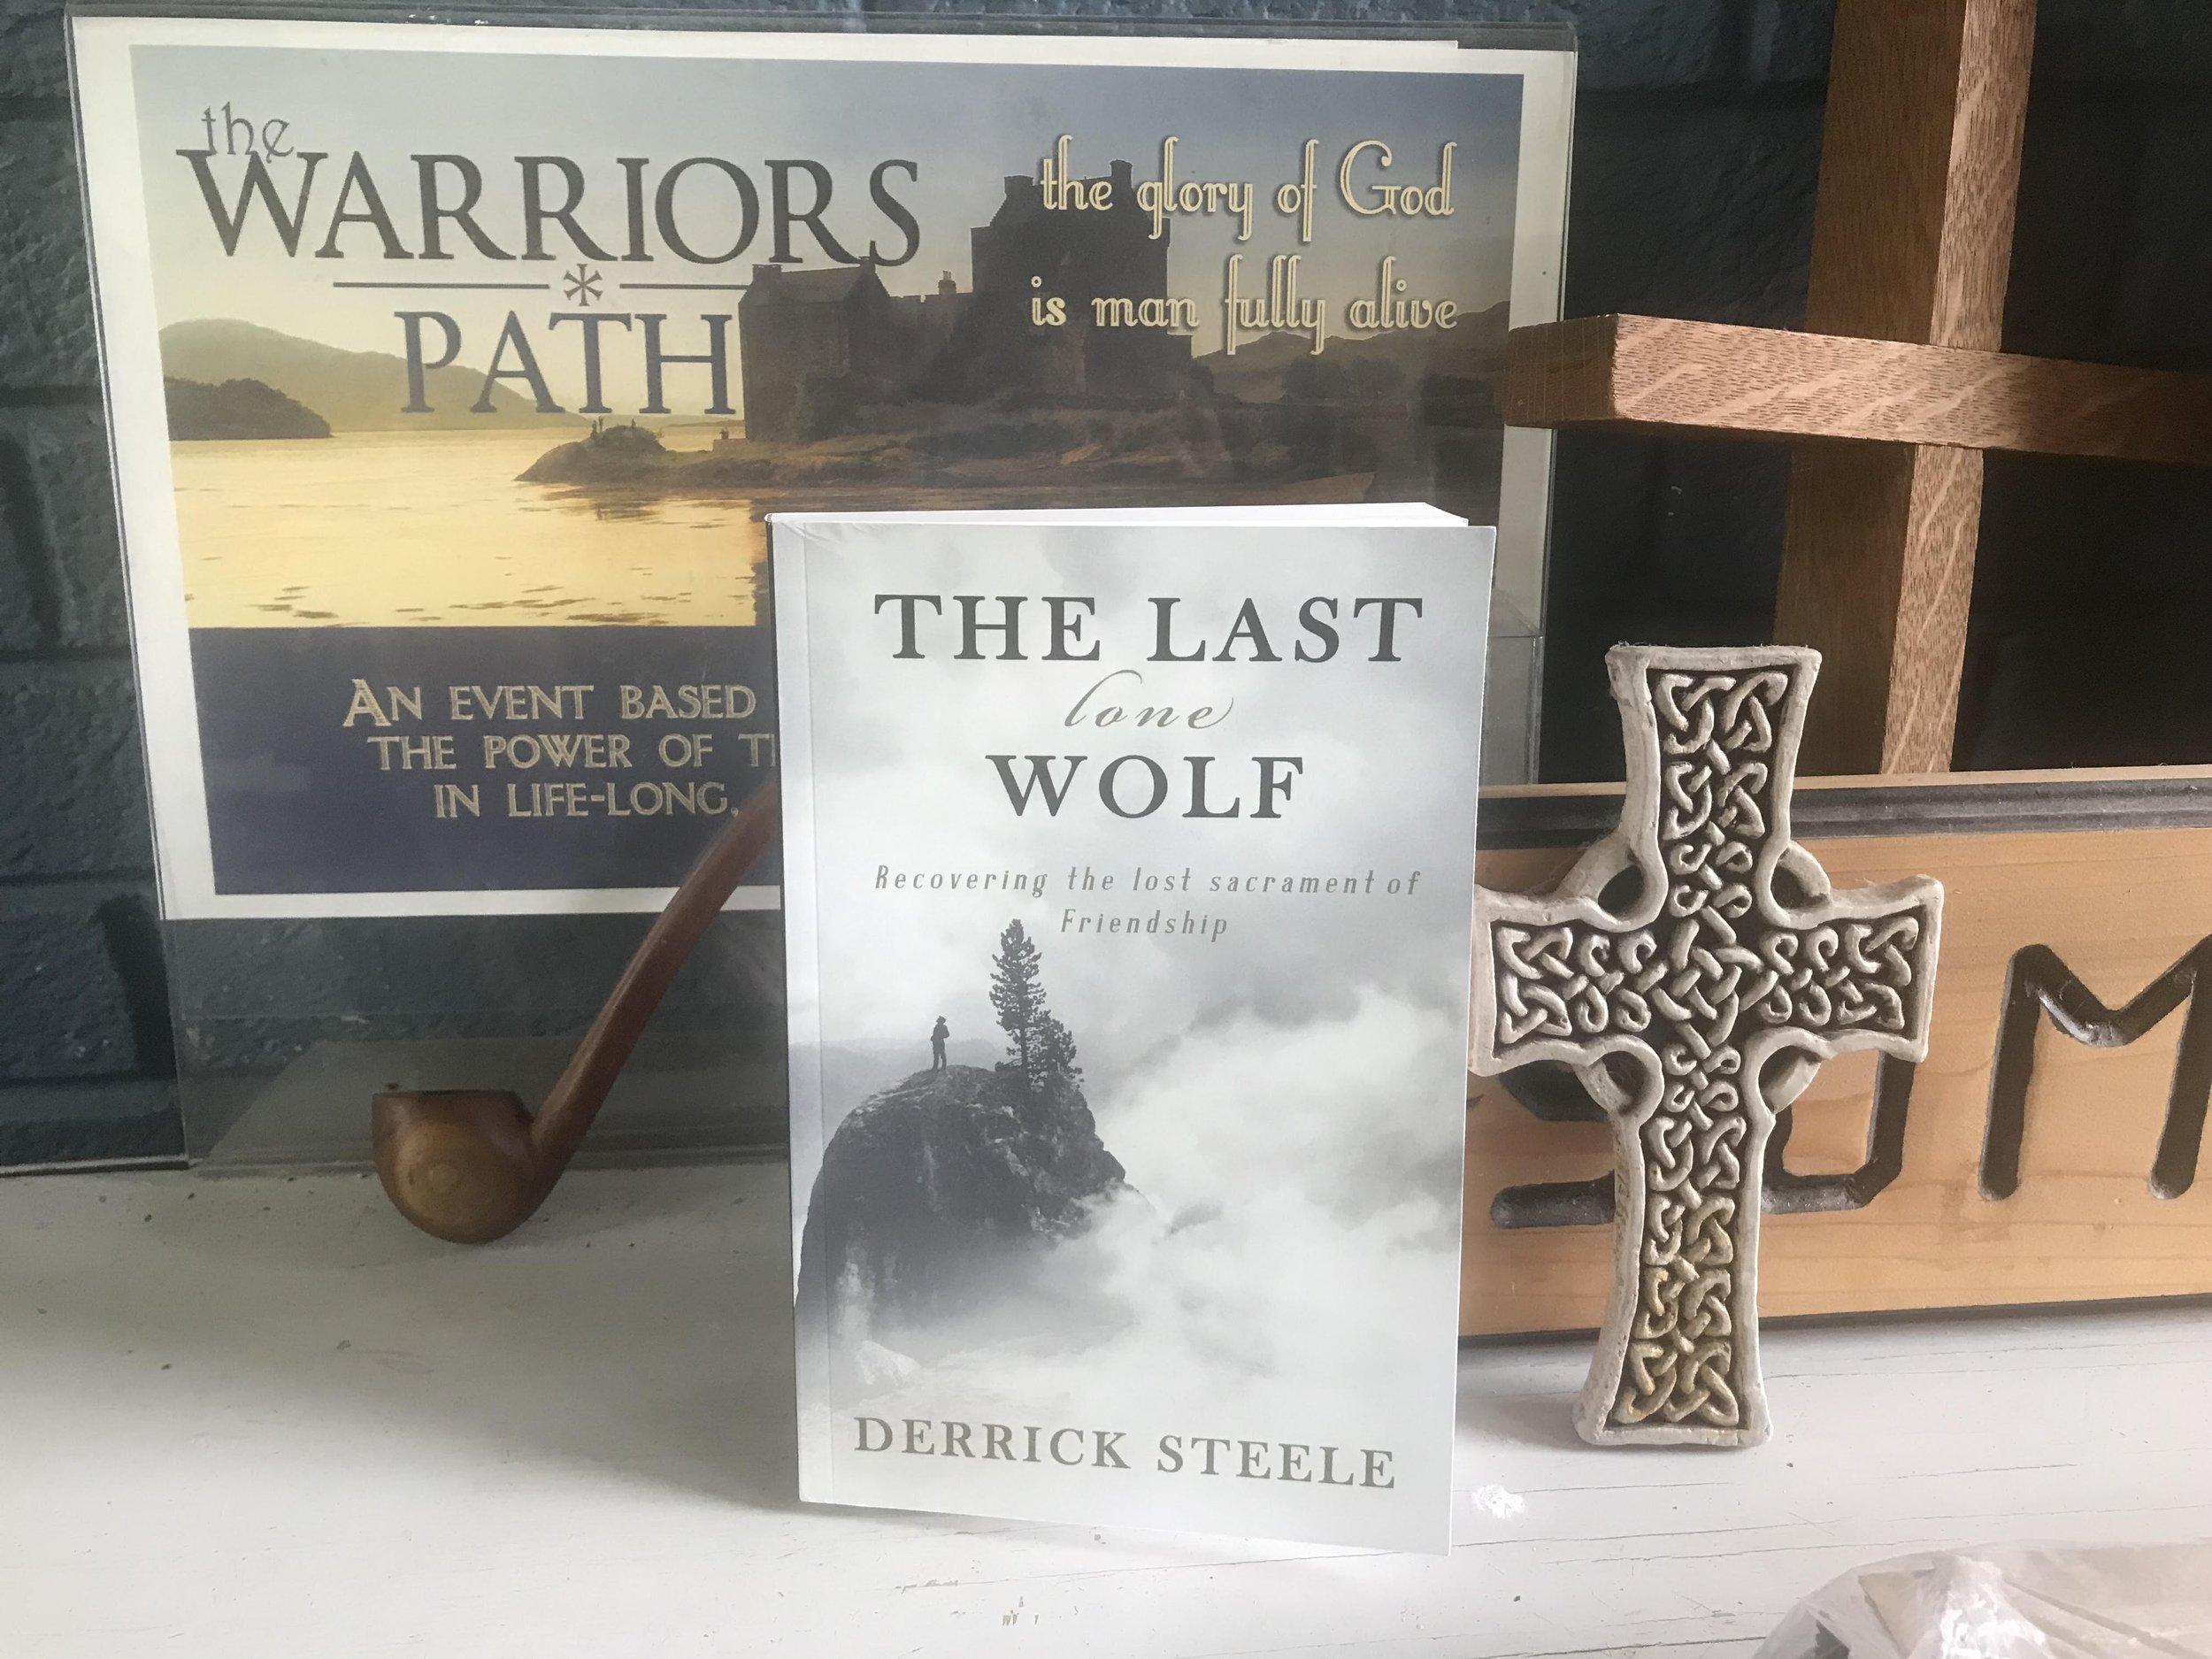   Brotherhood    is at the heart of The Warriors Path    Order your copy of The Last Lone Wolf   